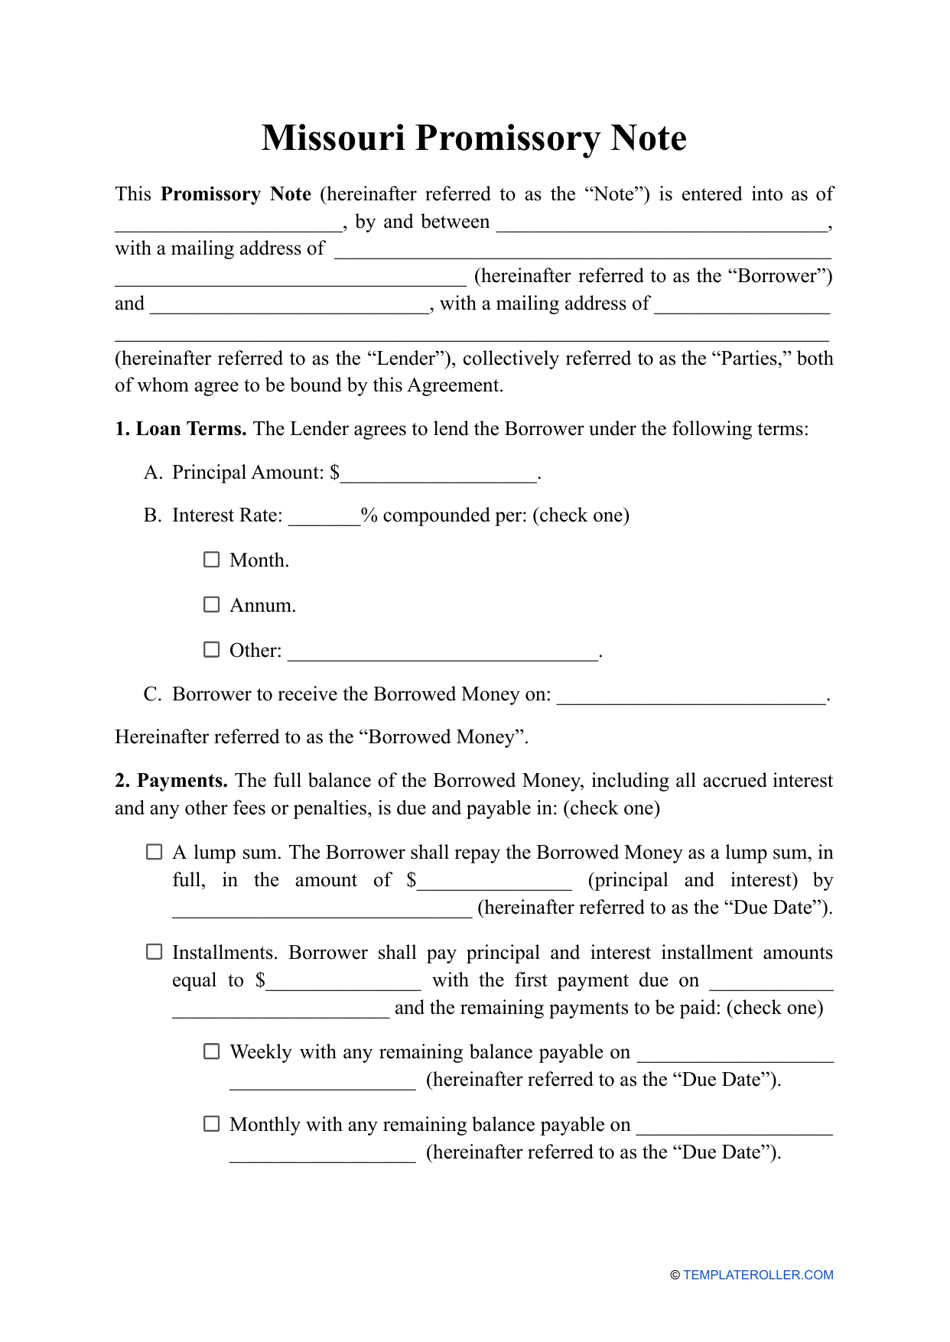 Missouri Promissory Note Template Download Printable PDF Templateroller